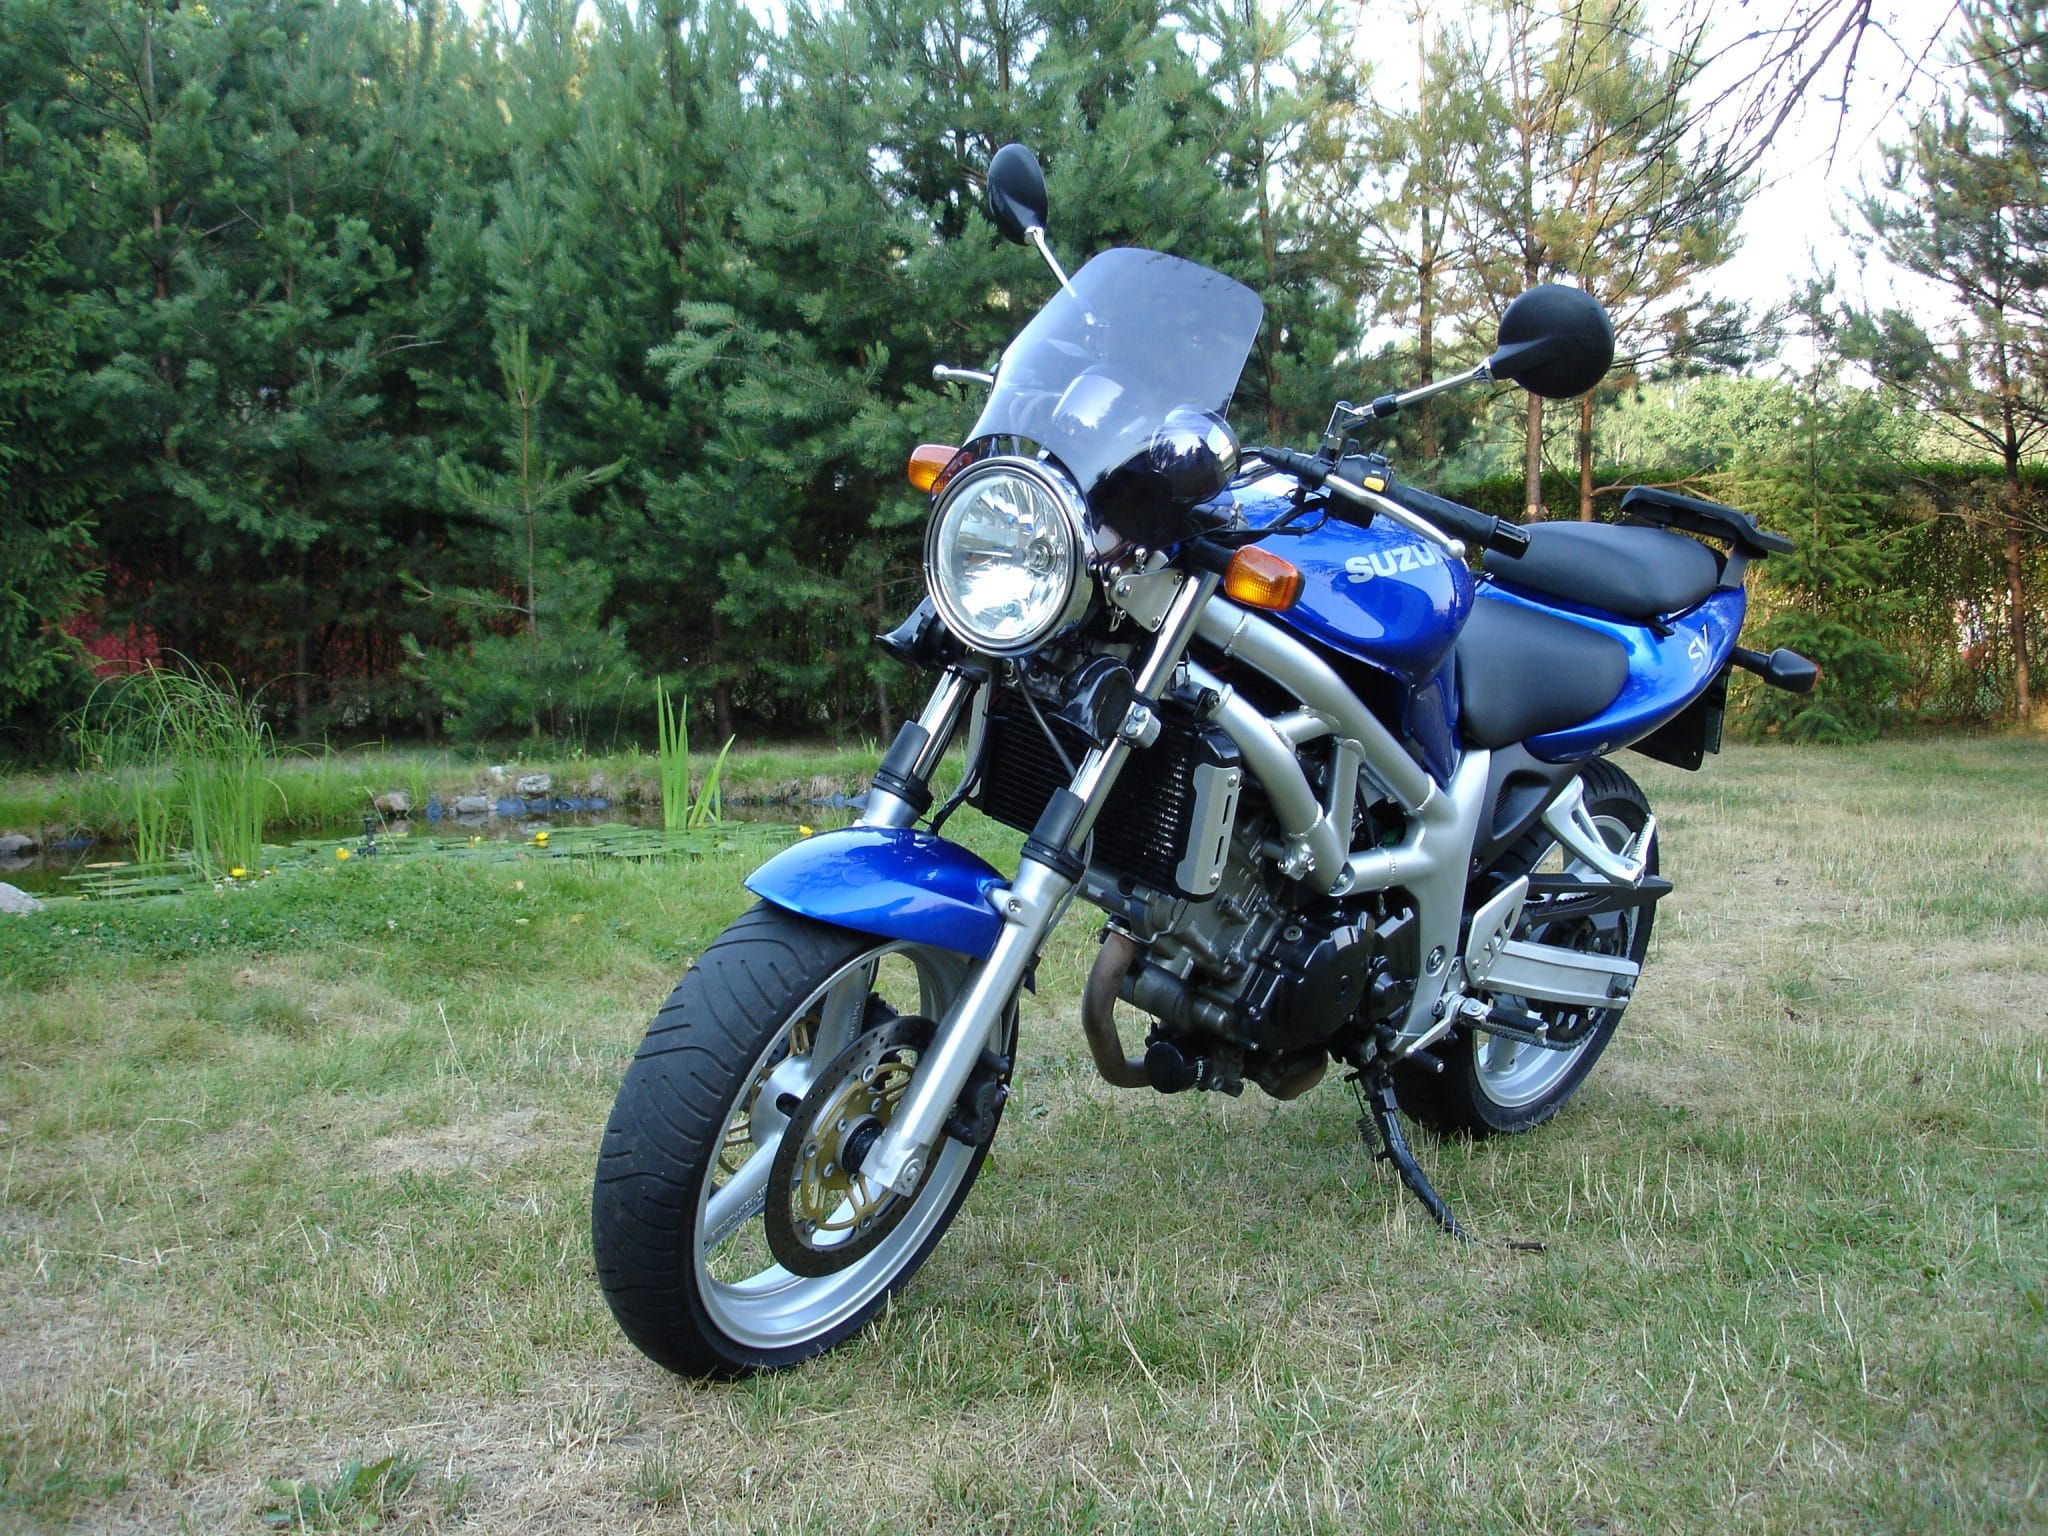 2017 Suzuki SV650 Naked, Entry-Level Motorcycle Review 